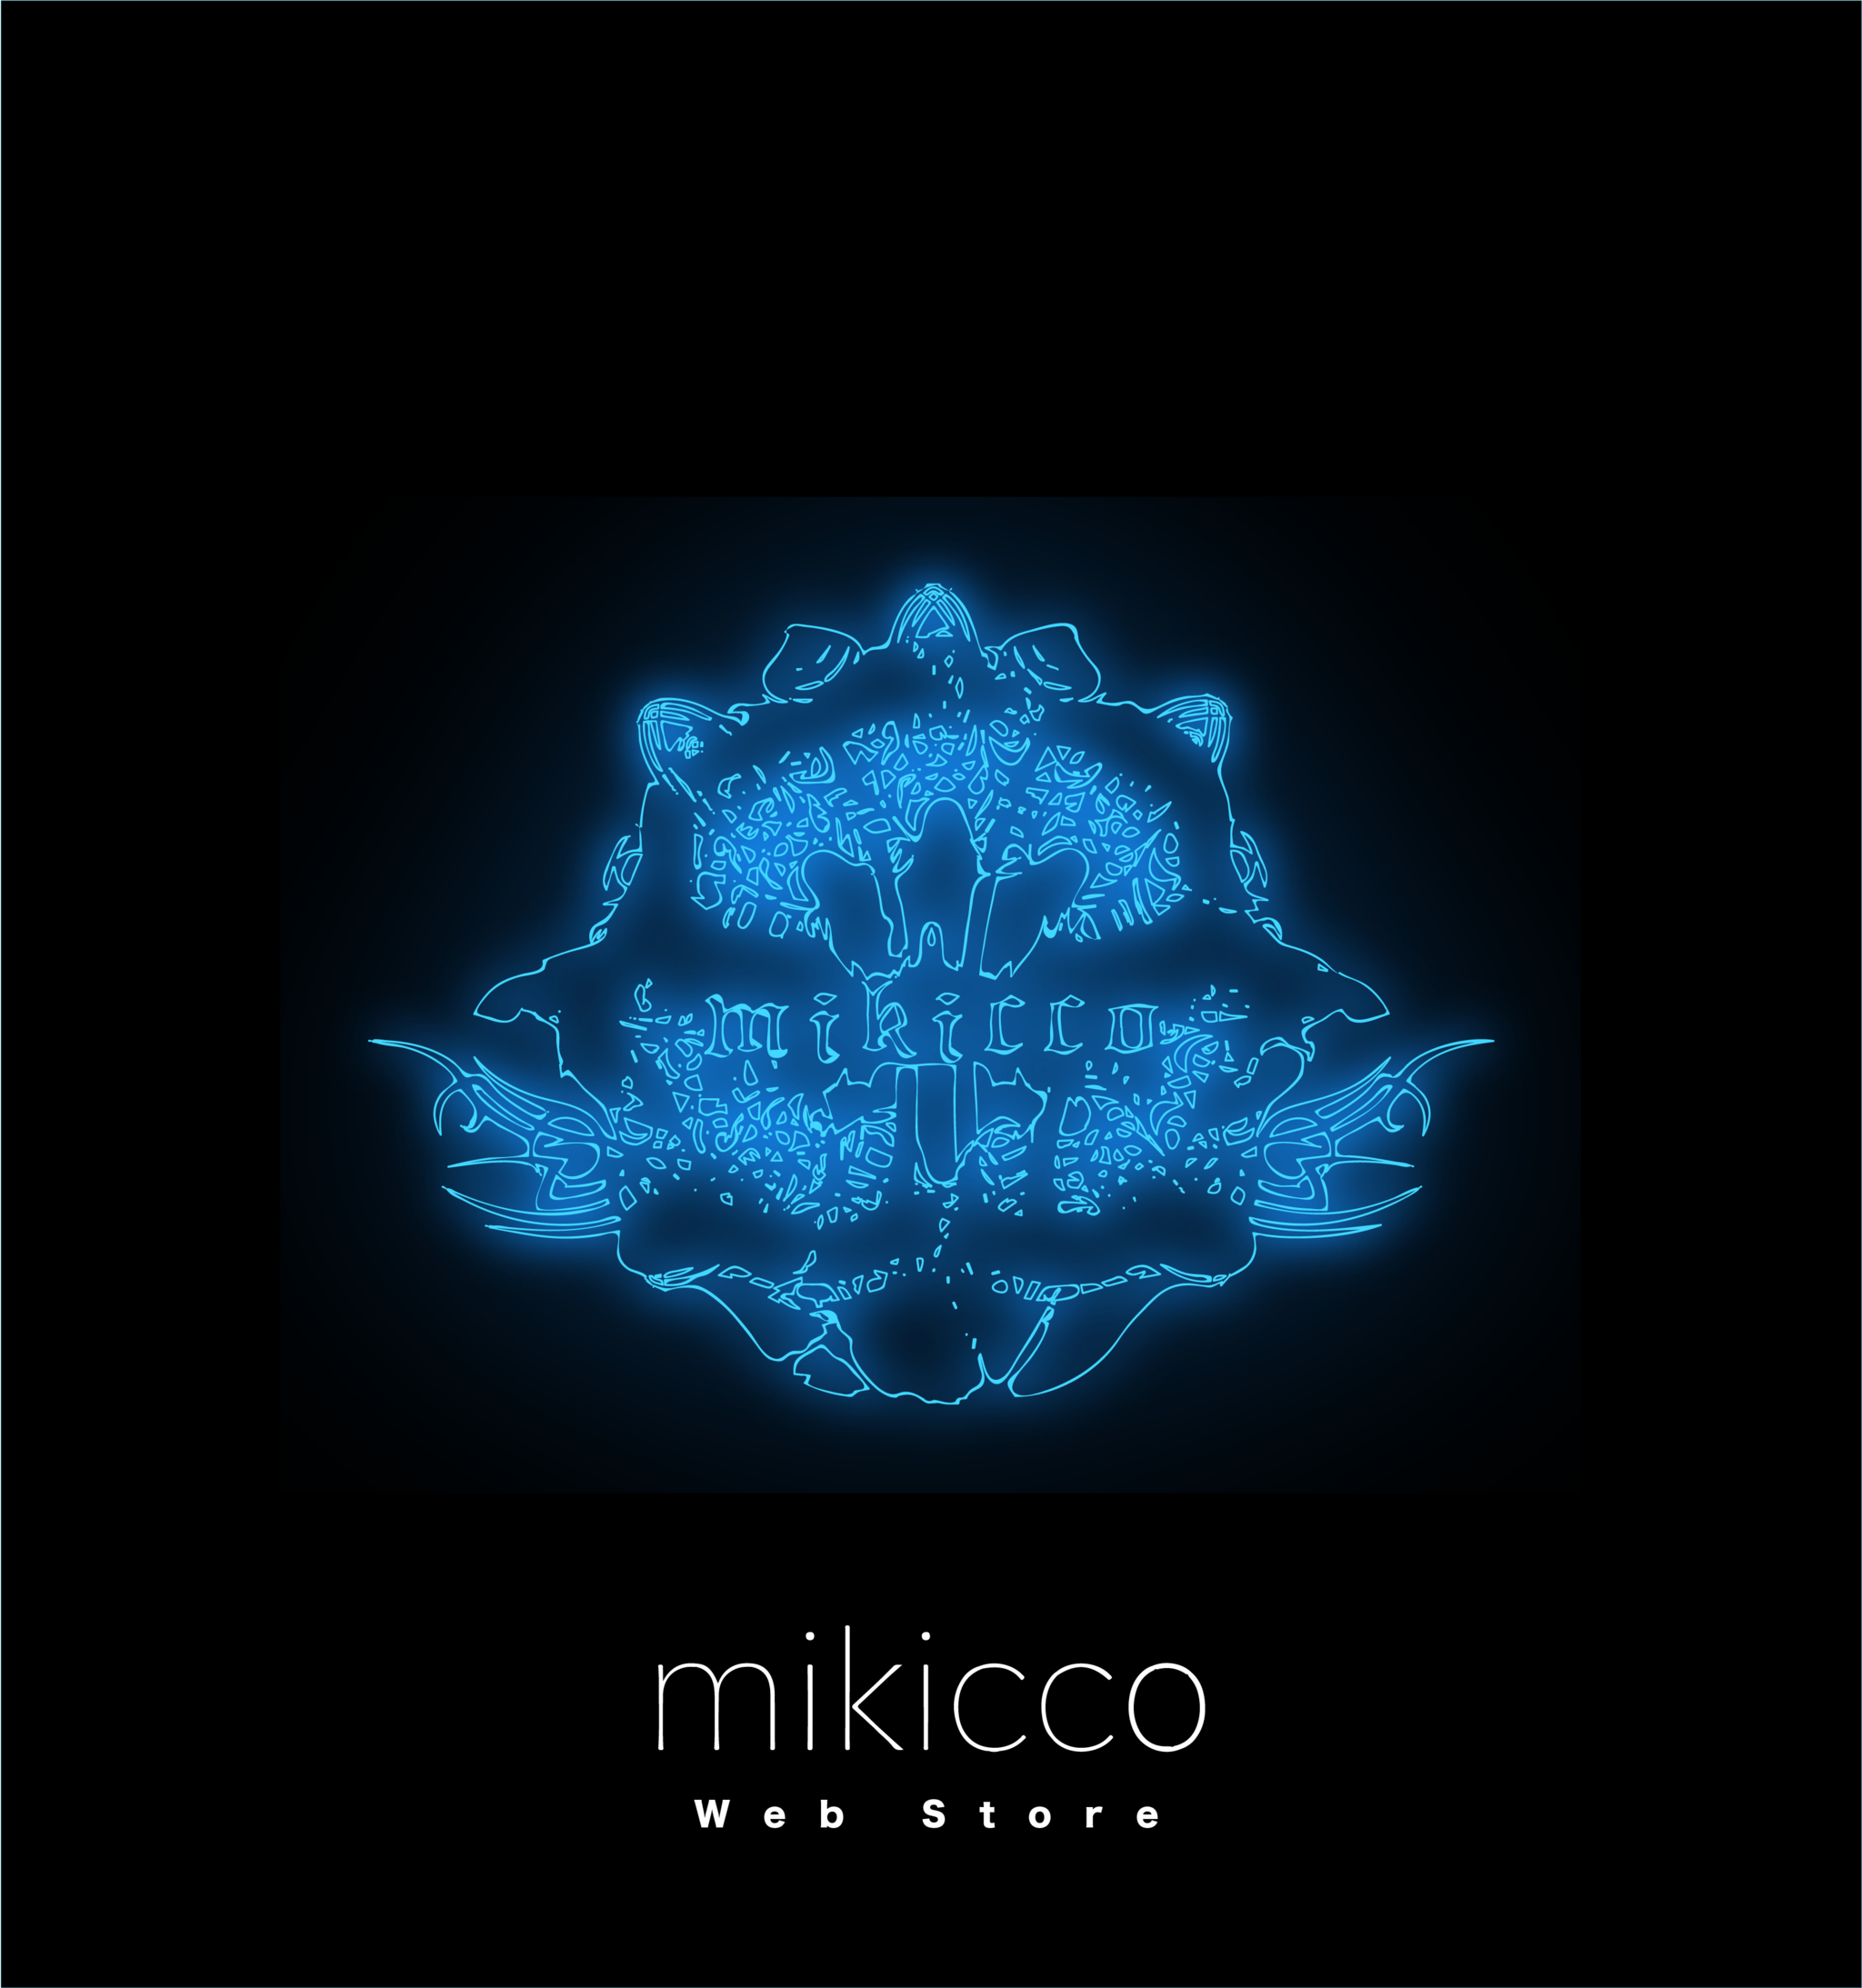 mikicco official website